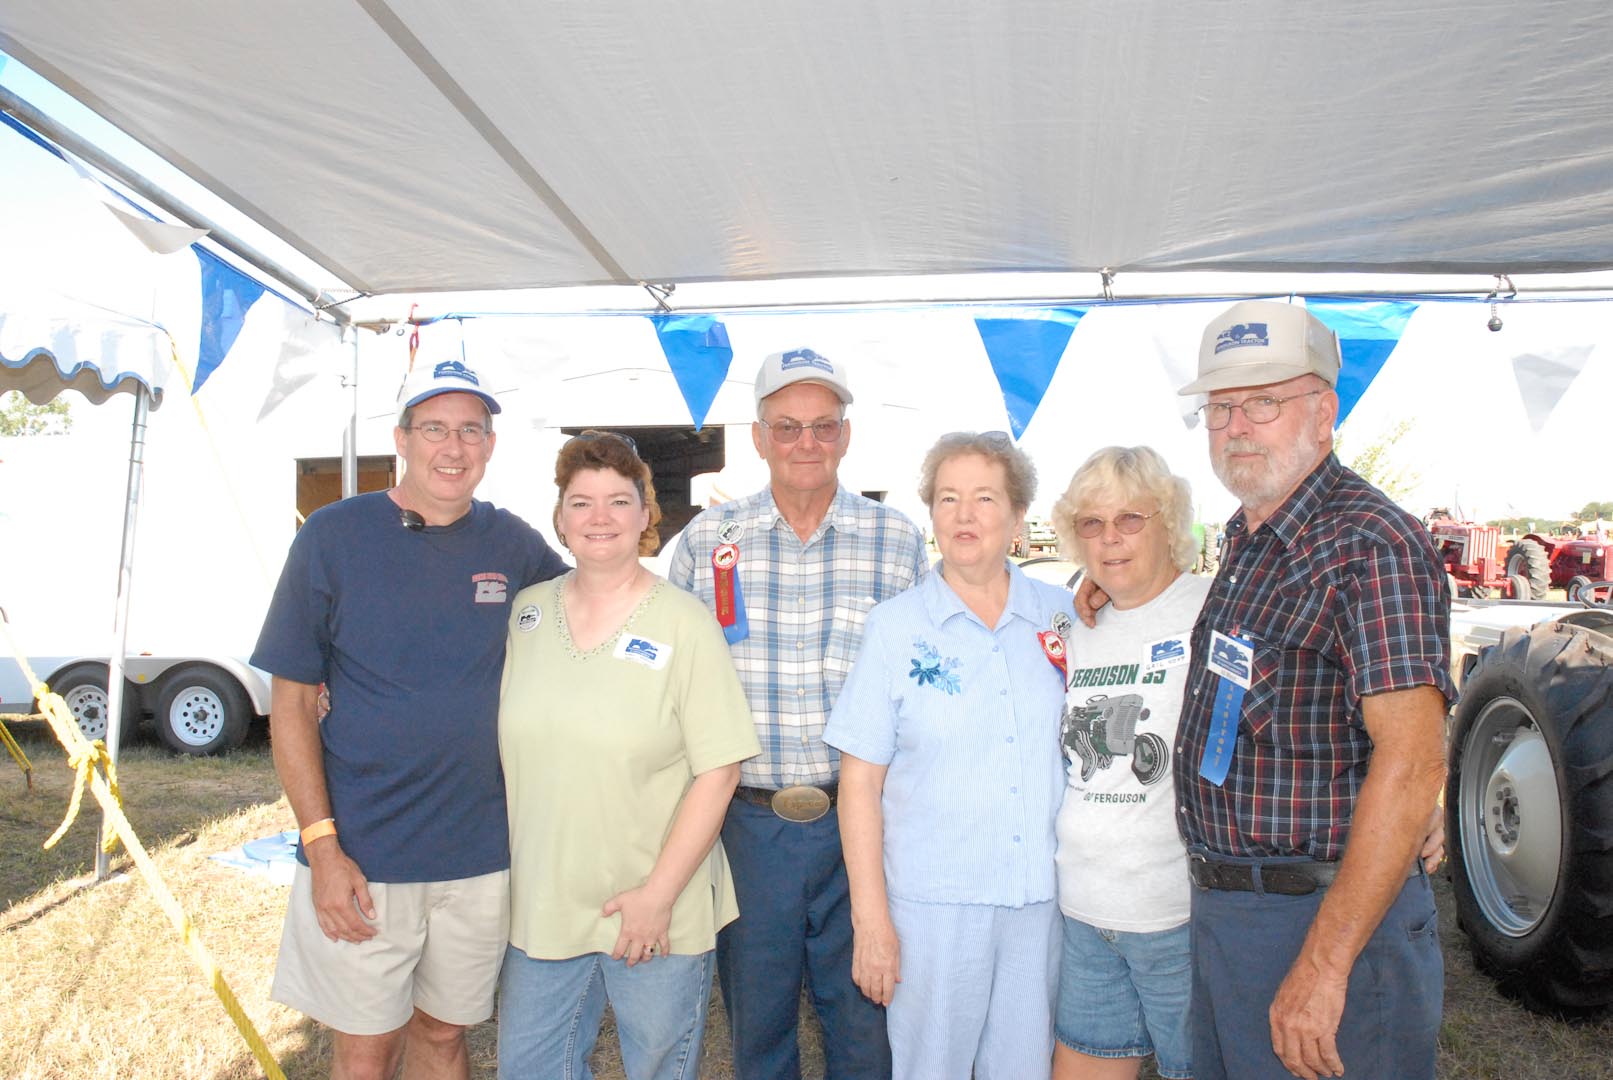 The Expo is a great place to catch up with old friends and be able to visit in person. From left to right are Rick and Sarah Weaver of Memphis, Tennessee, Gene and Joy Kruse of Lincoln, Nebraska, and Al and Gail Hoyt of Chester, New Hampshire.